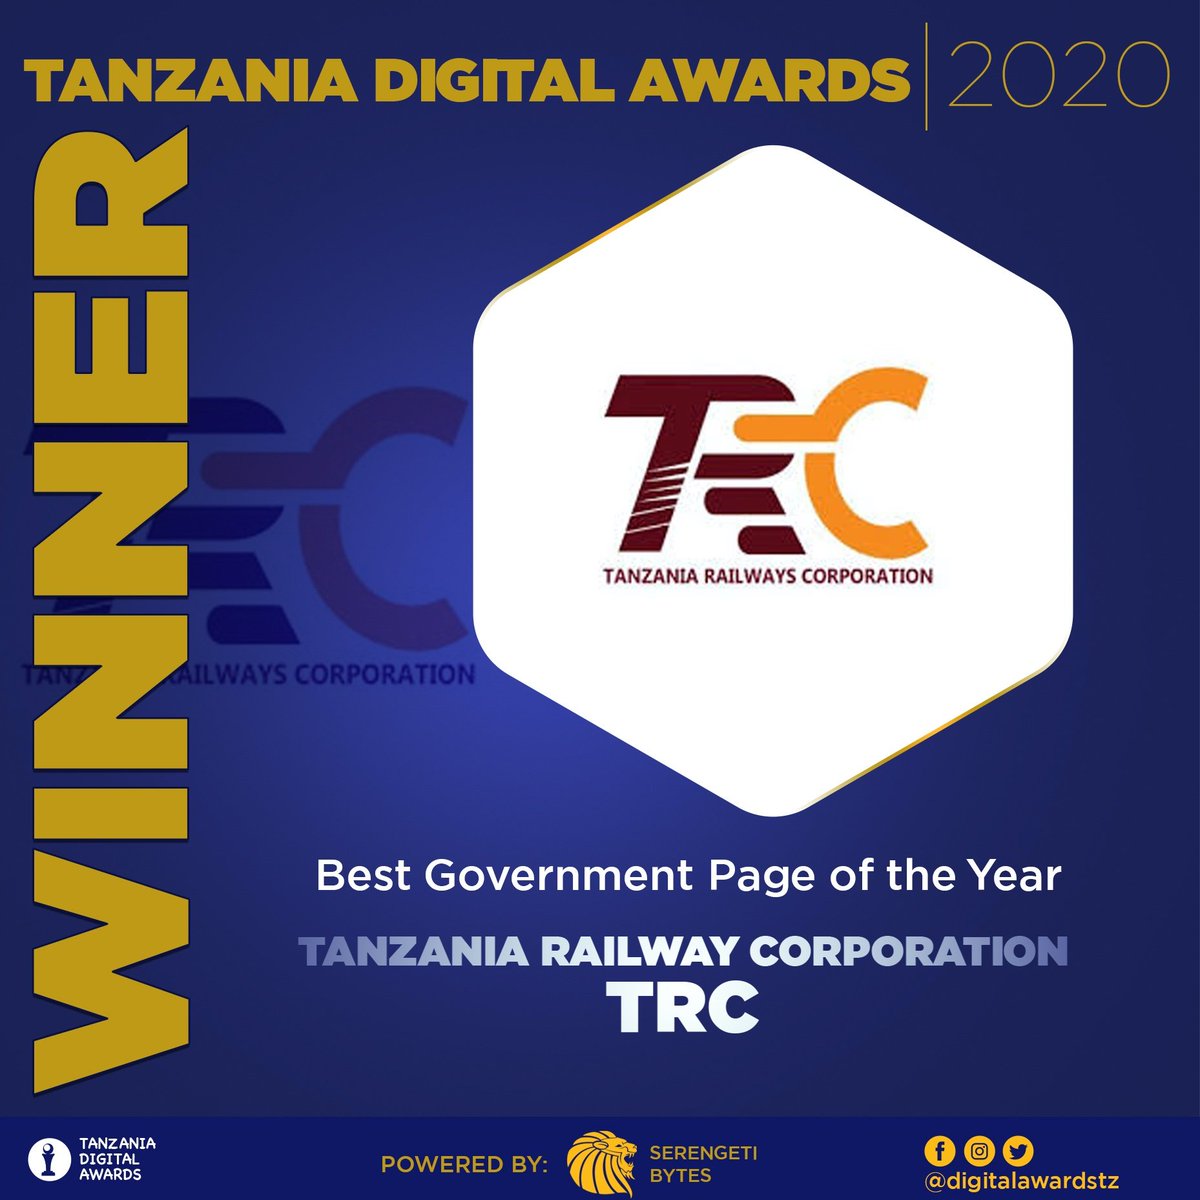 Feeling proud as part of the team to be honored this; Today @DigitalAwardsTZ has announced @tzrailways as Best Government Page of the Year 2020. #DigitalAwardsTZ2020 Cc. @SerengetiBytes @KennedyMmari